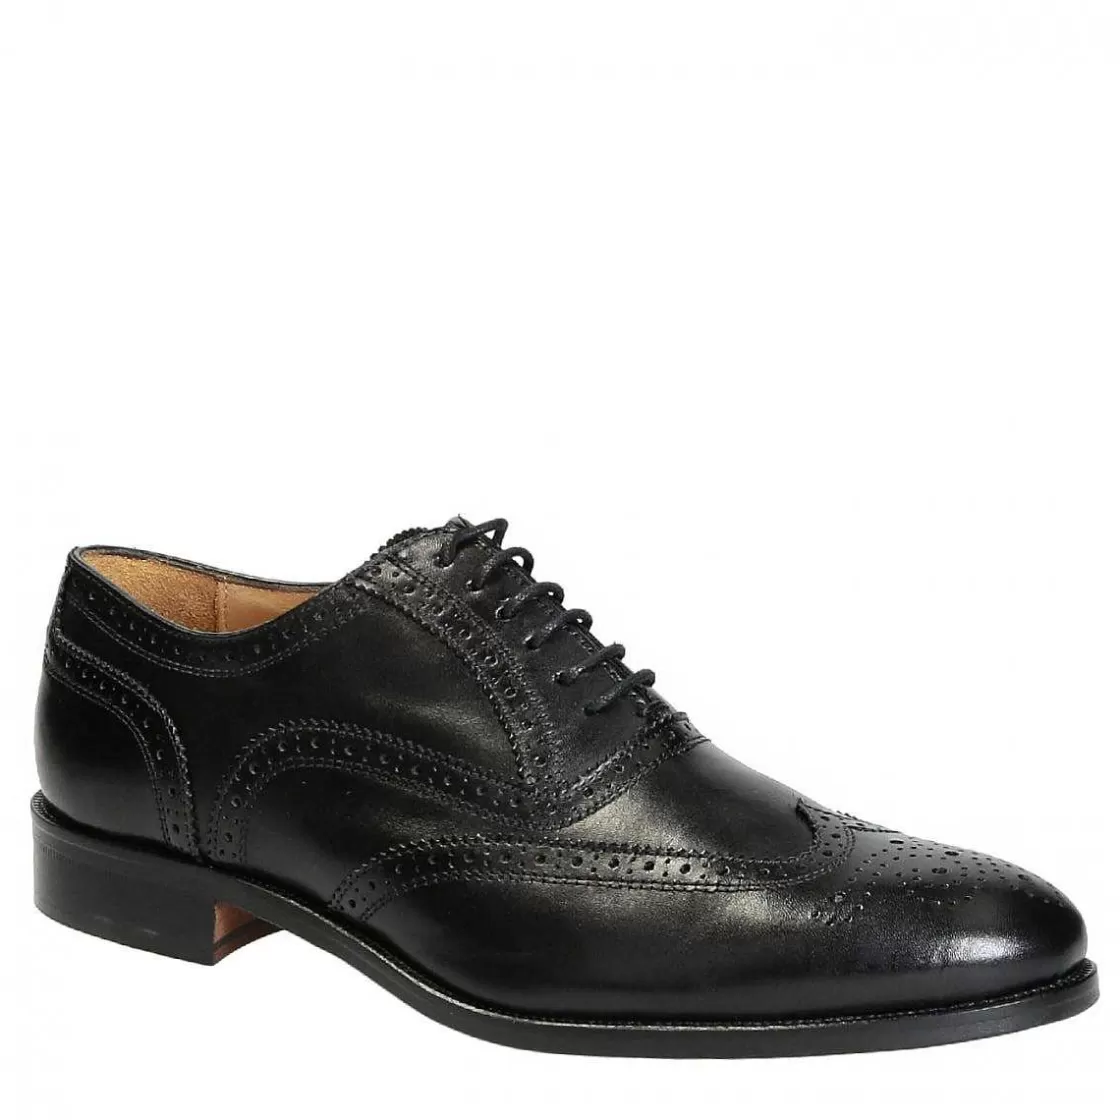 Leonardo Handcrafted Men'S Oxford Shoes In Black Leather Flash Sale